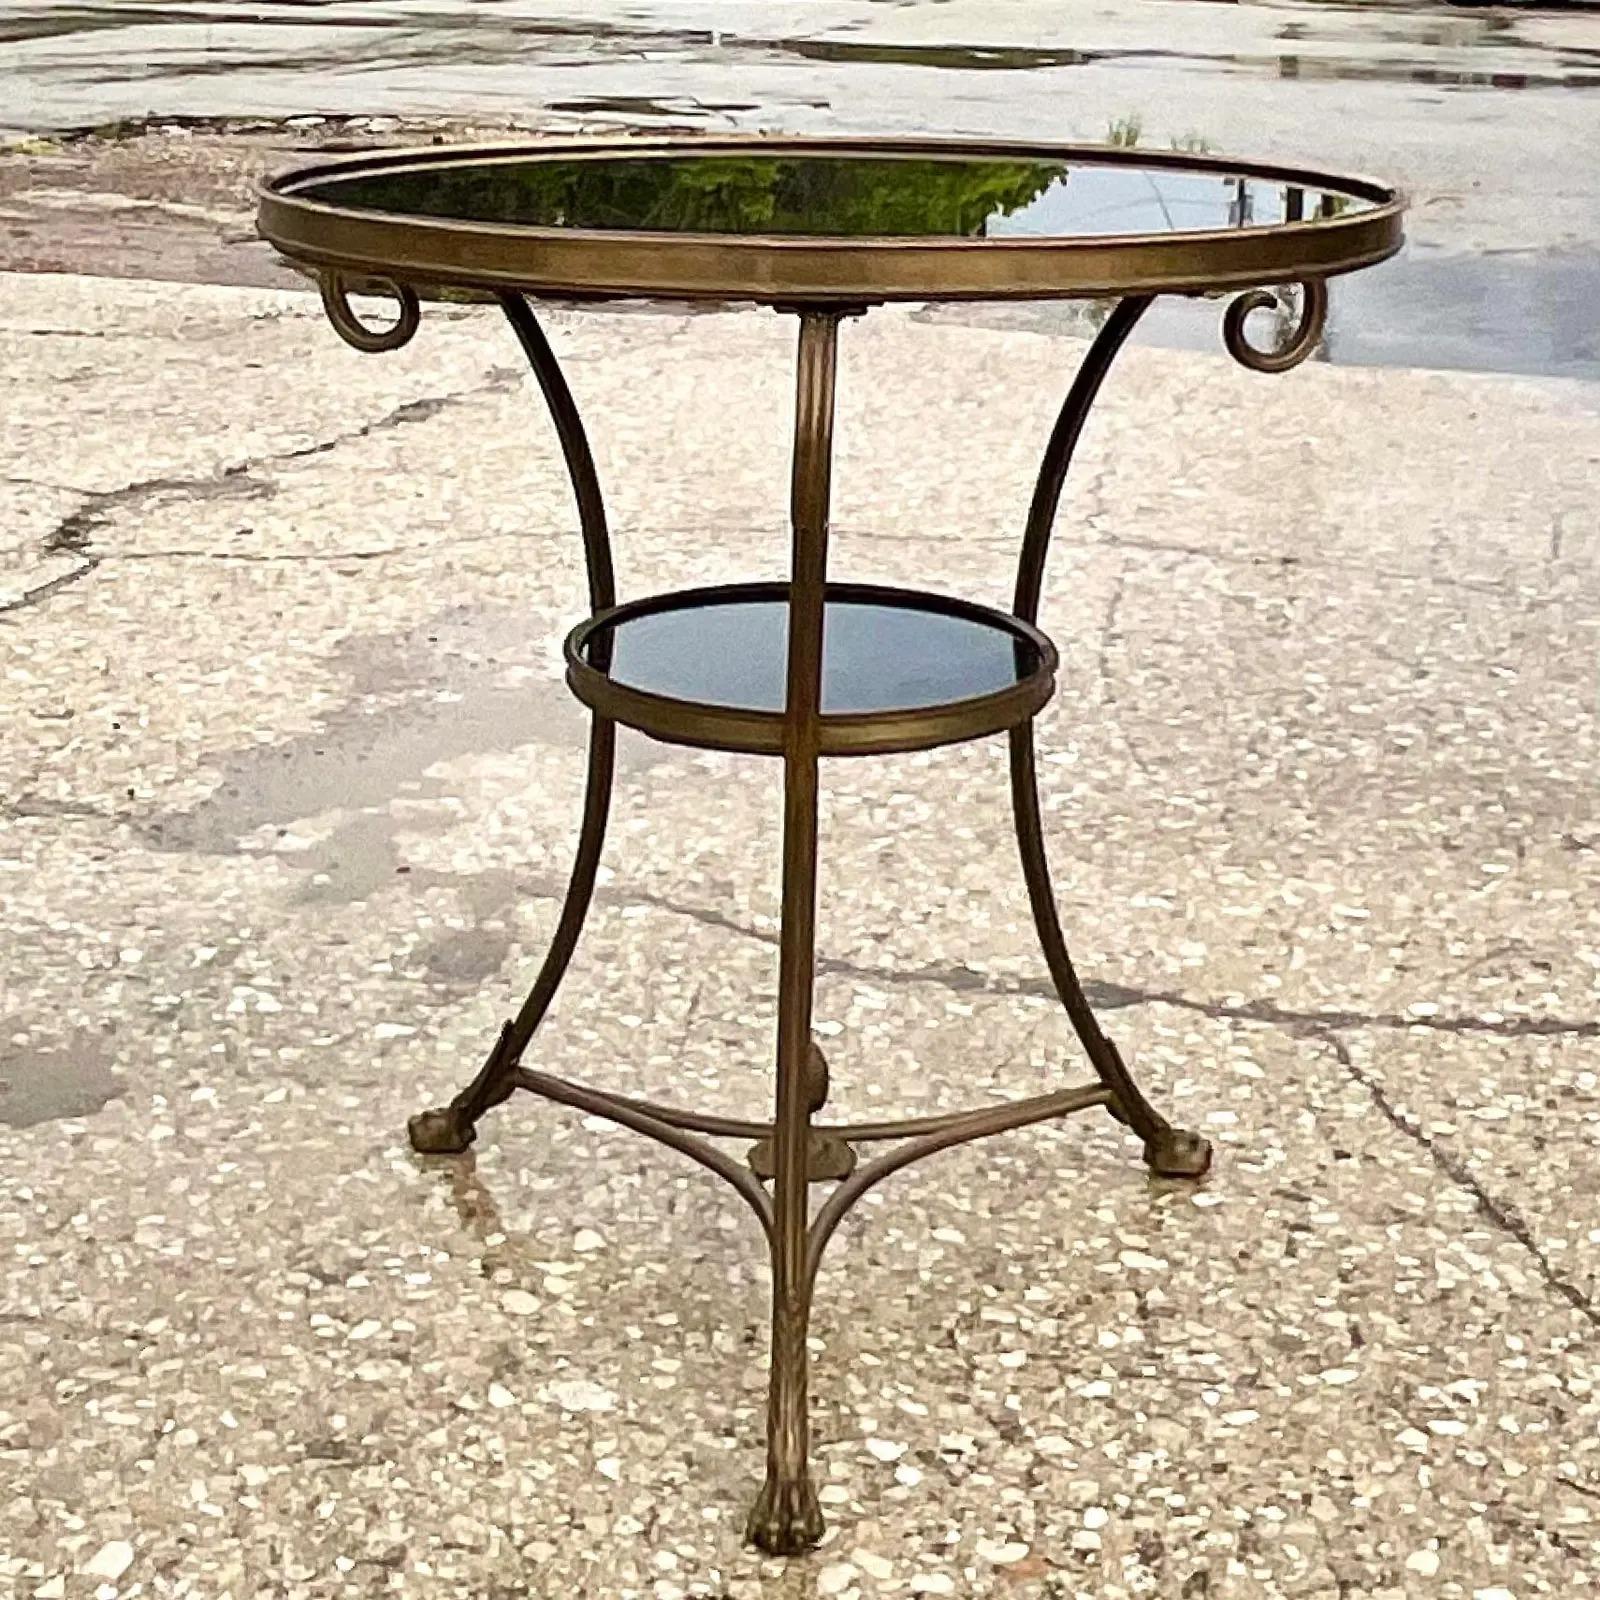 Fantastic vintage Regency side table. A beautiful black marble top in a chic Gueridon shape. Elegant brass frame with two levels. Acquired from a Palm Beach estate.